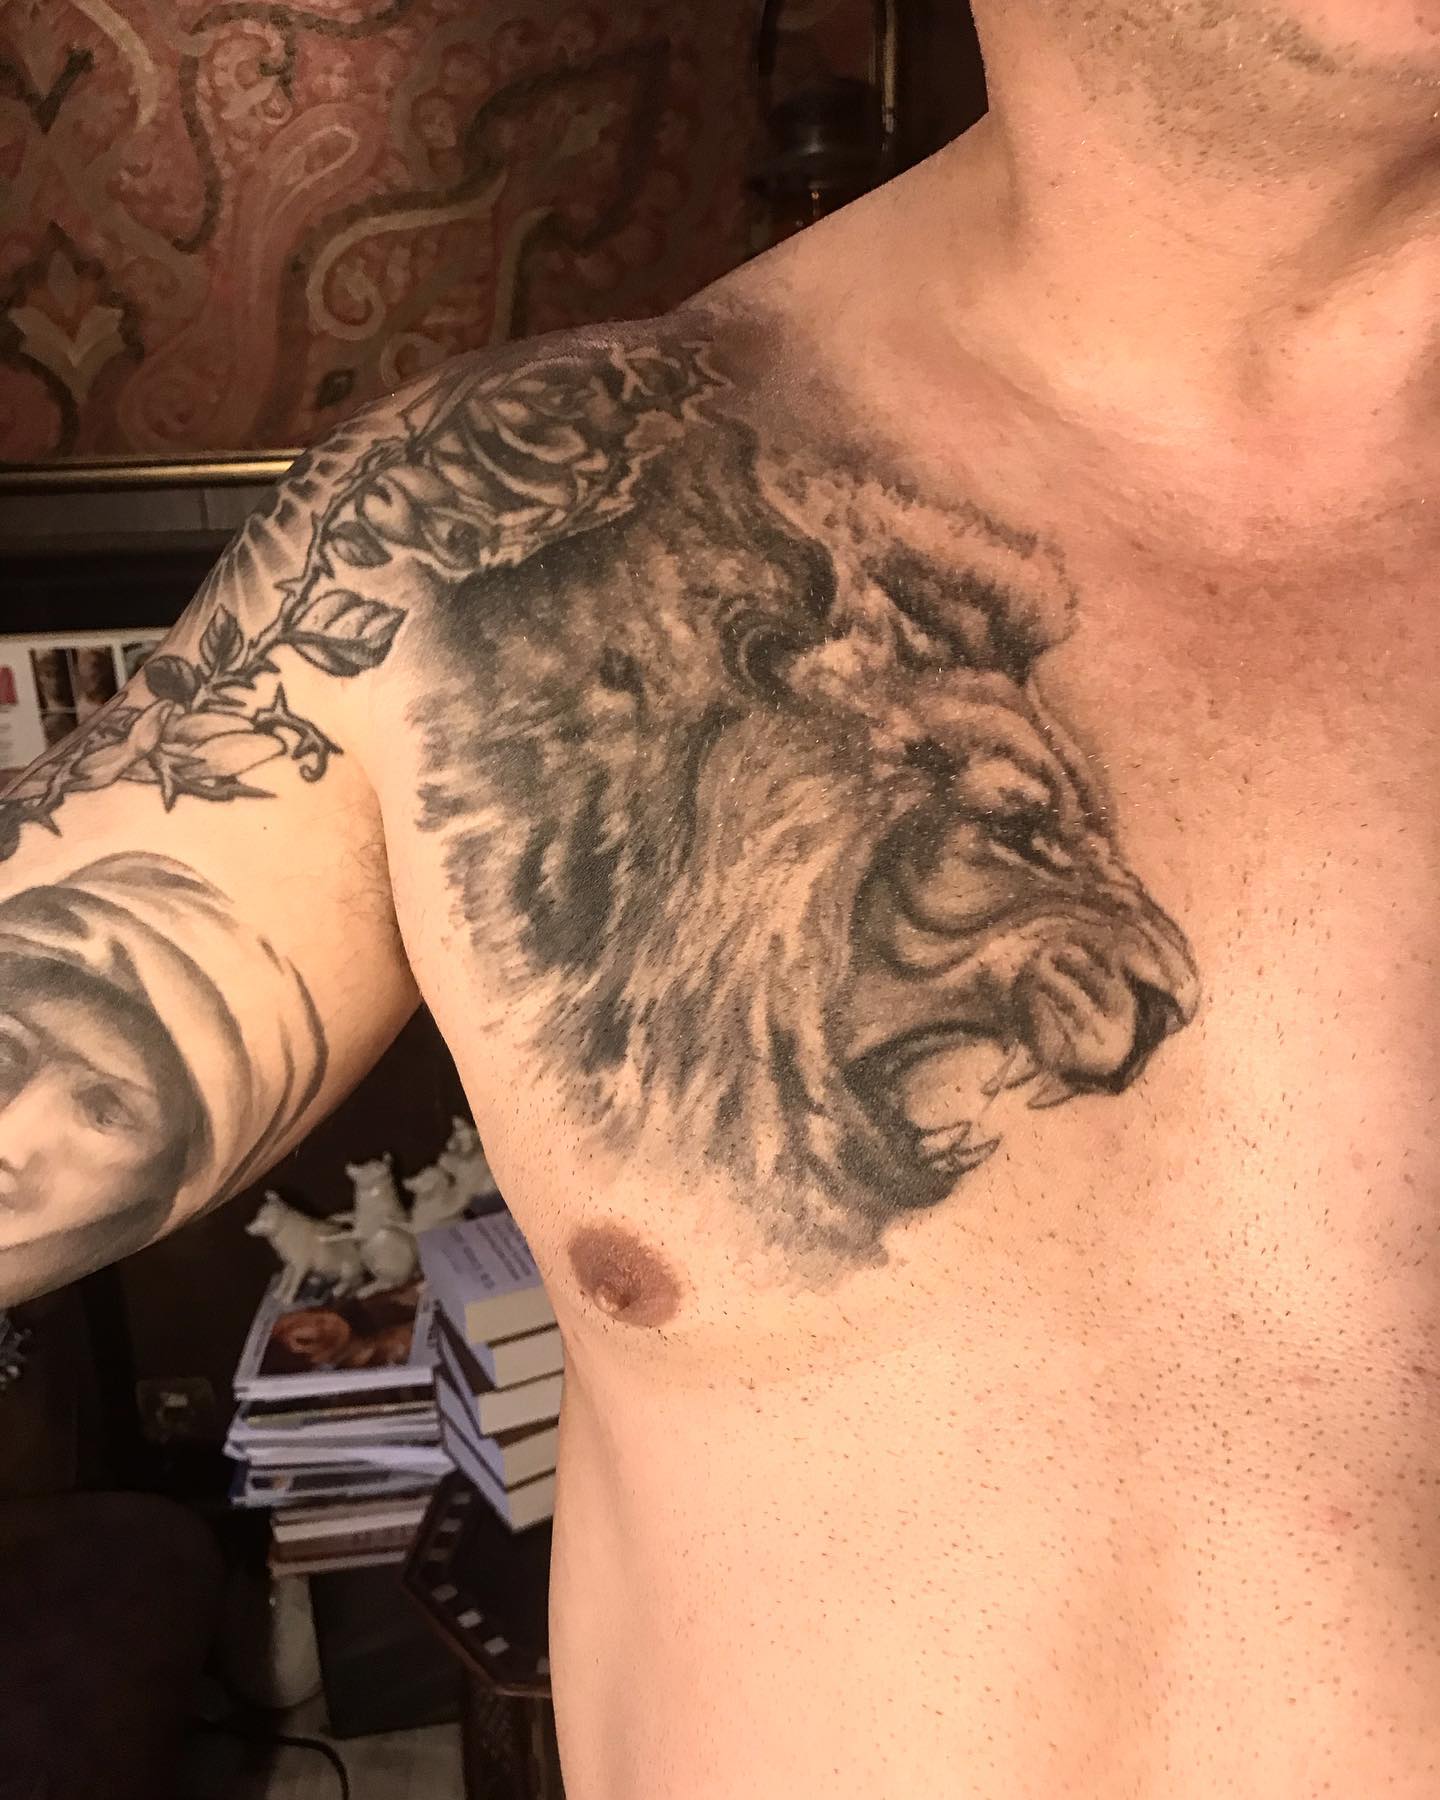 A cool roaring lion tattoo, without doubt, will look amazing on your body.